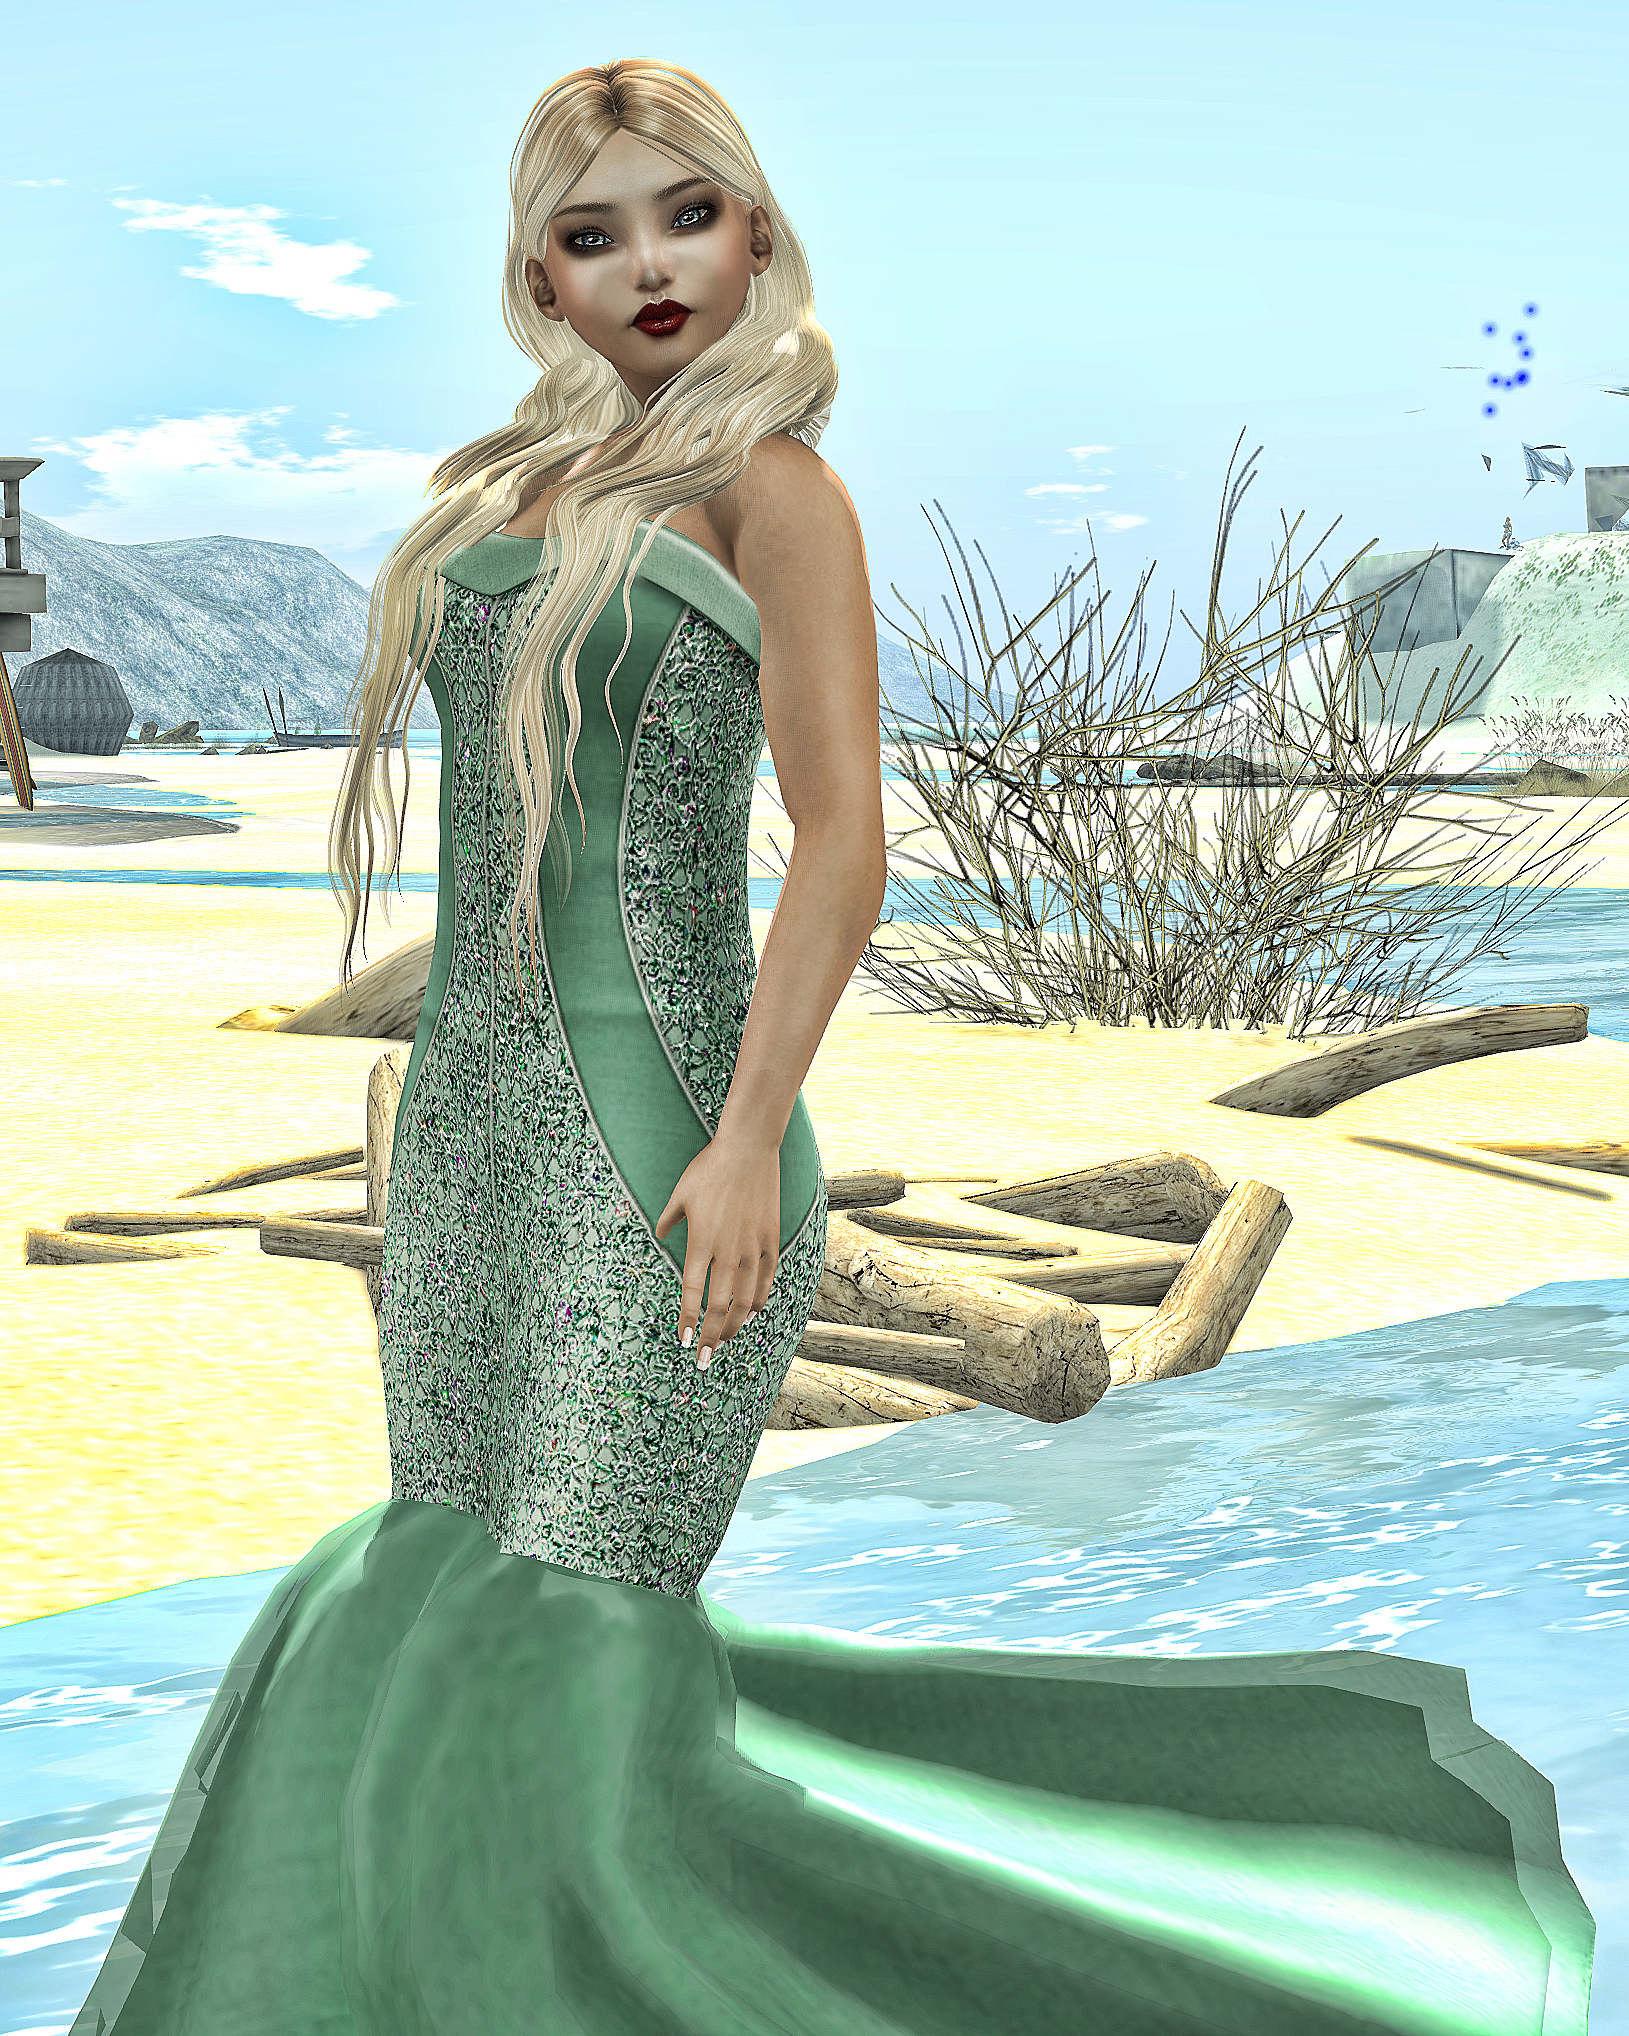 the woman wearing a green dress standing in water